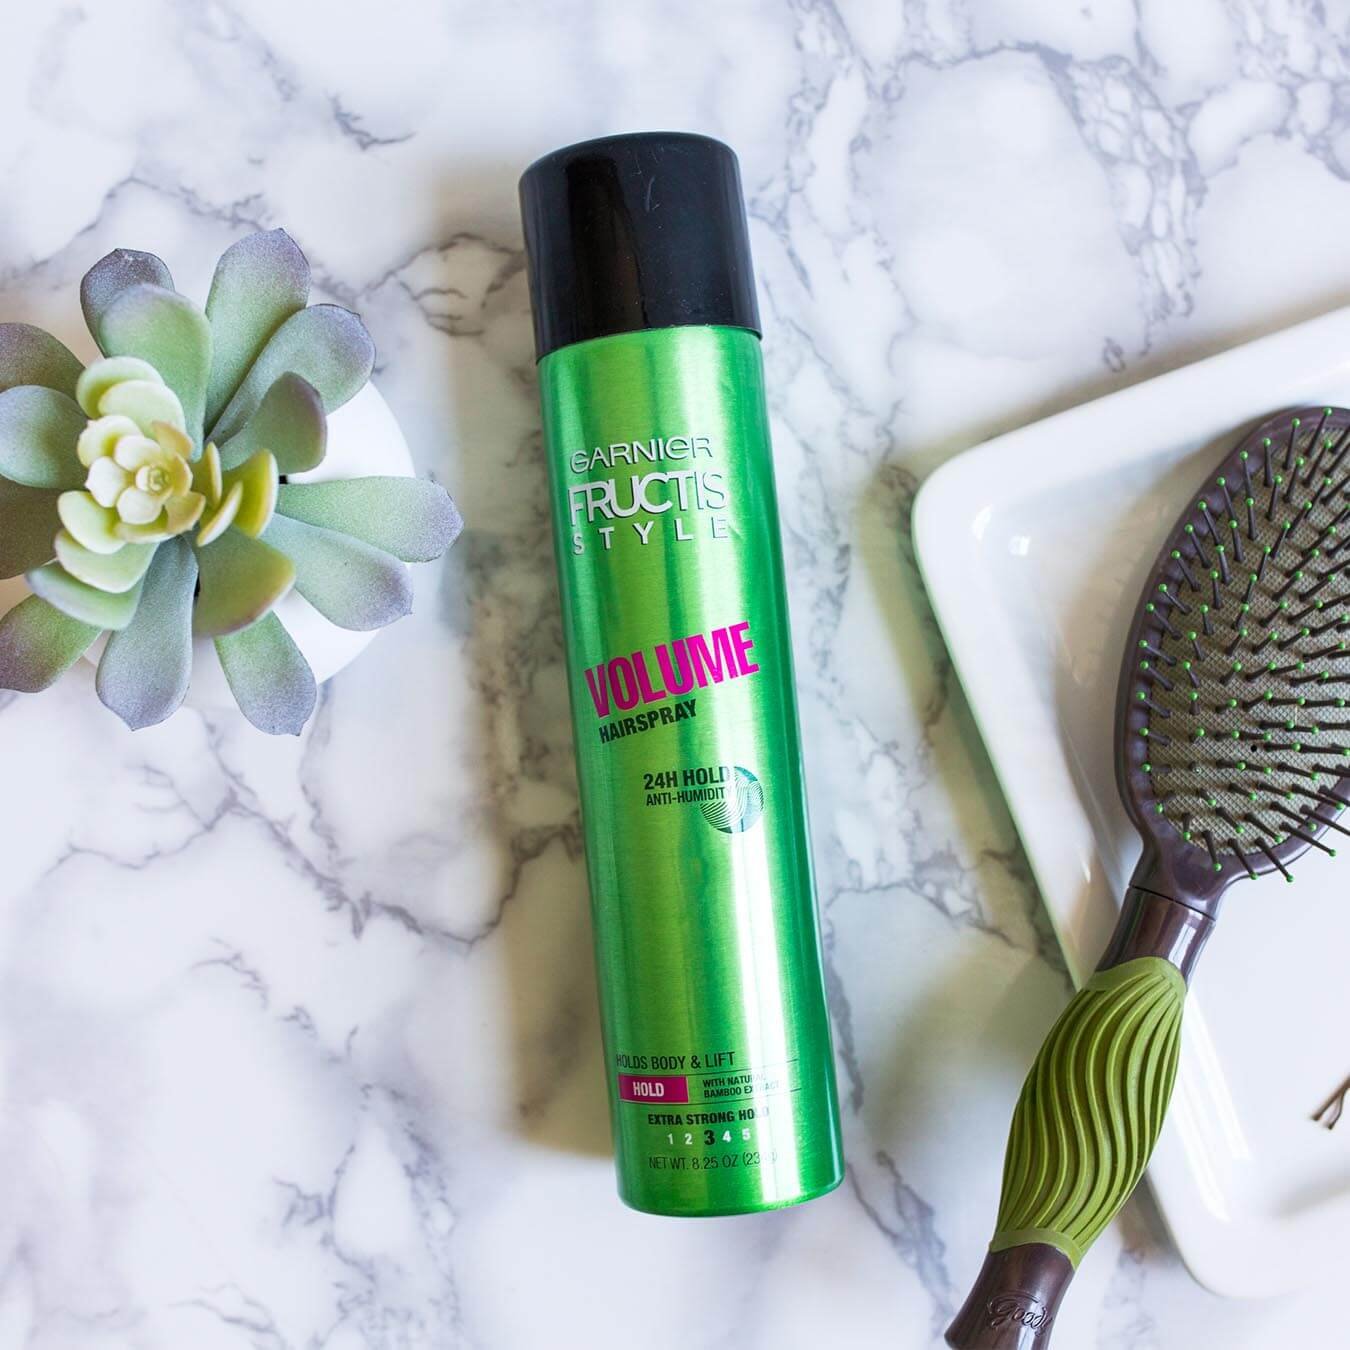 Garnier Fructis Style Volume Hairspray on white marble next to a potted succulent and a white tray holding a bobby pin and a green and brown brush.